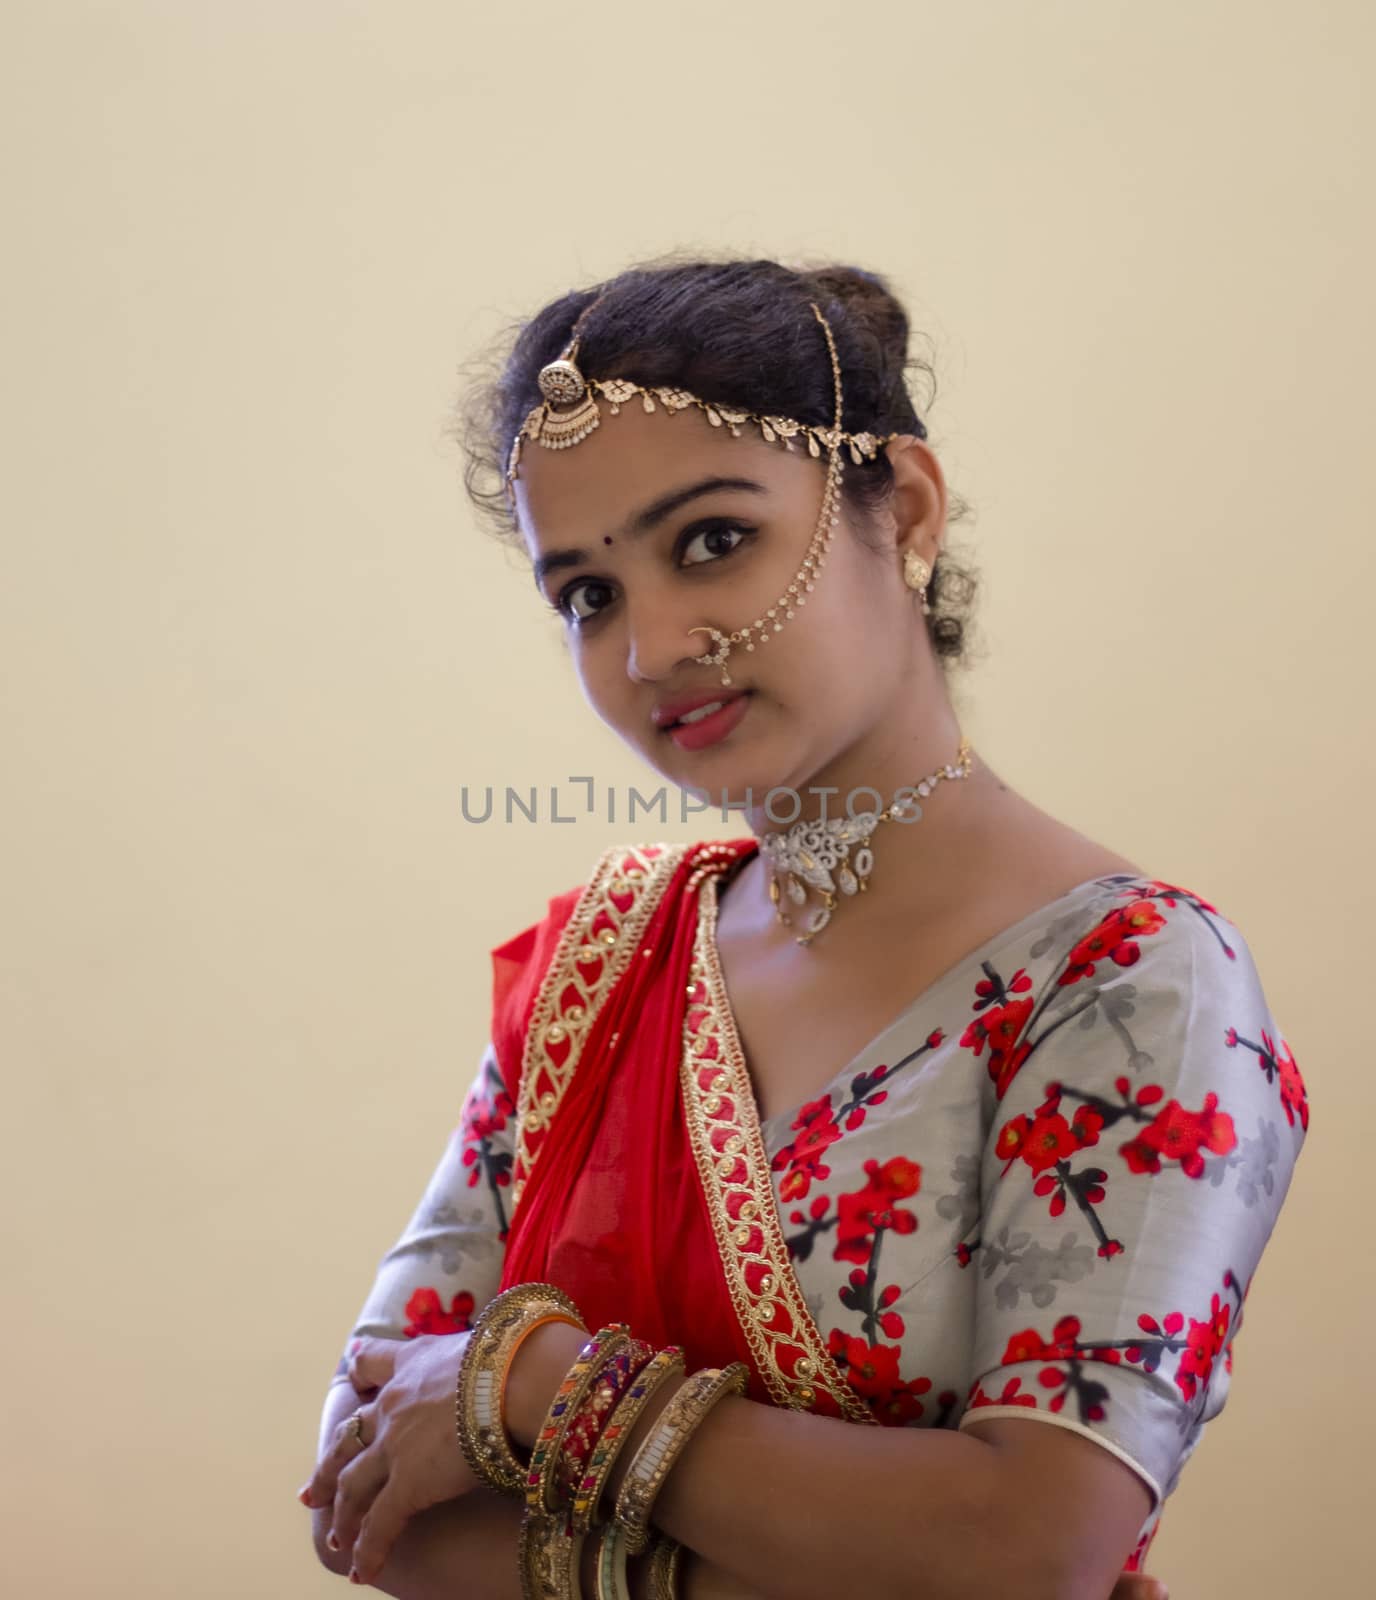 A beautiful young Hindu girl with gold ornaments and red lipstick on her attractive soft lips by 9500102400